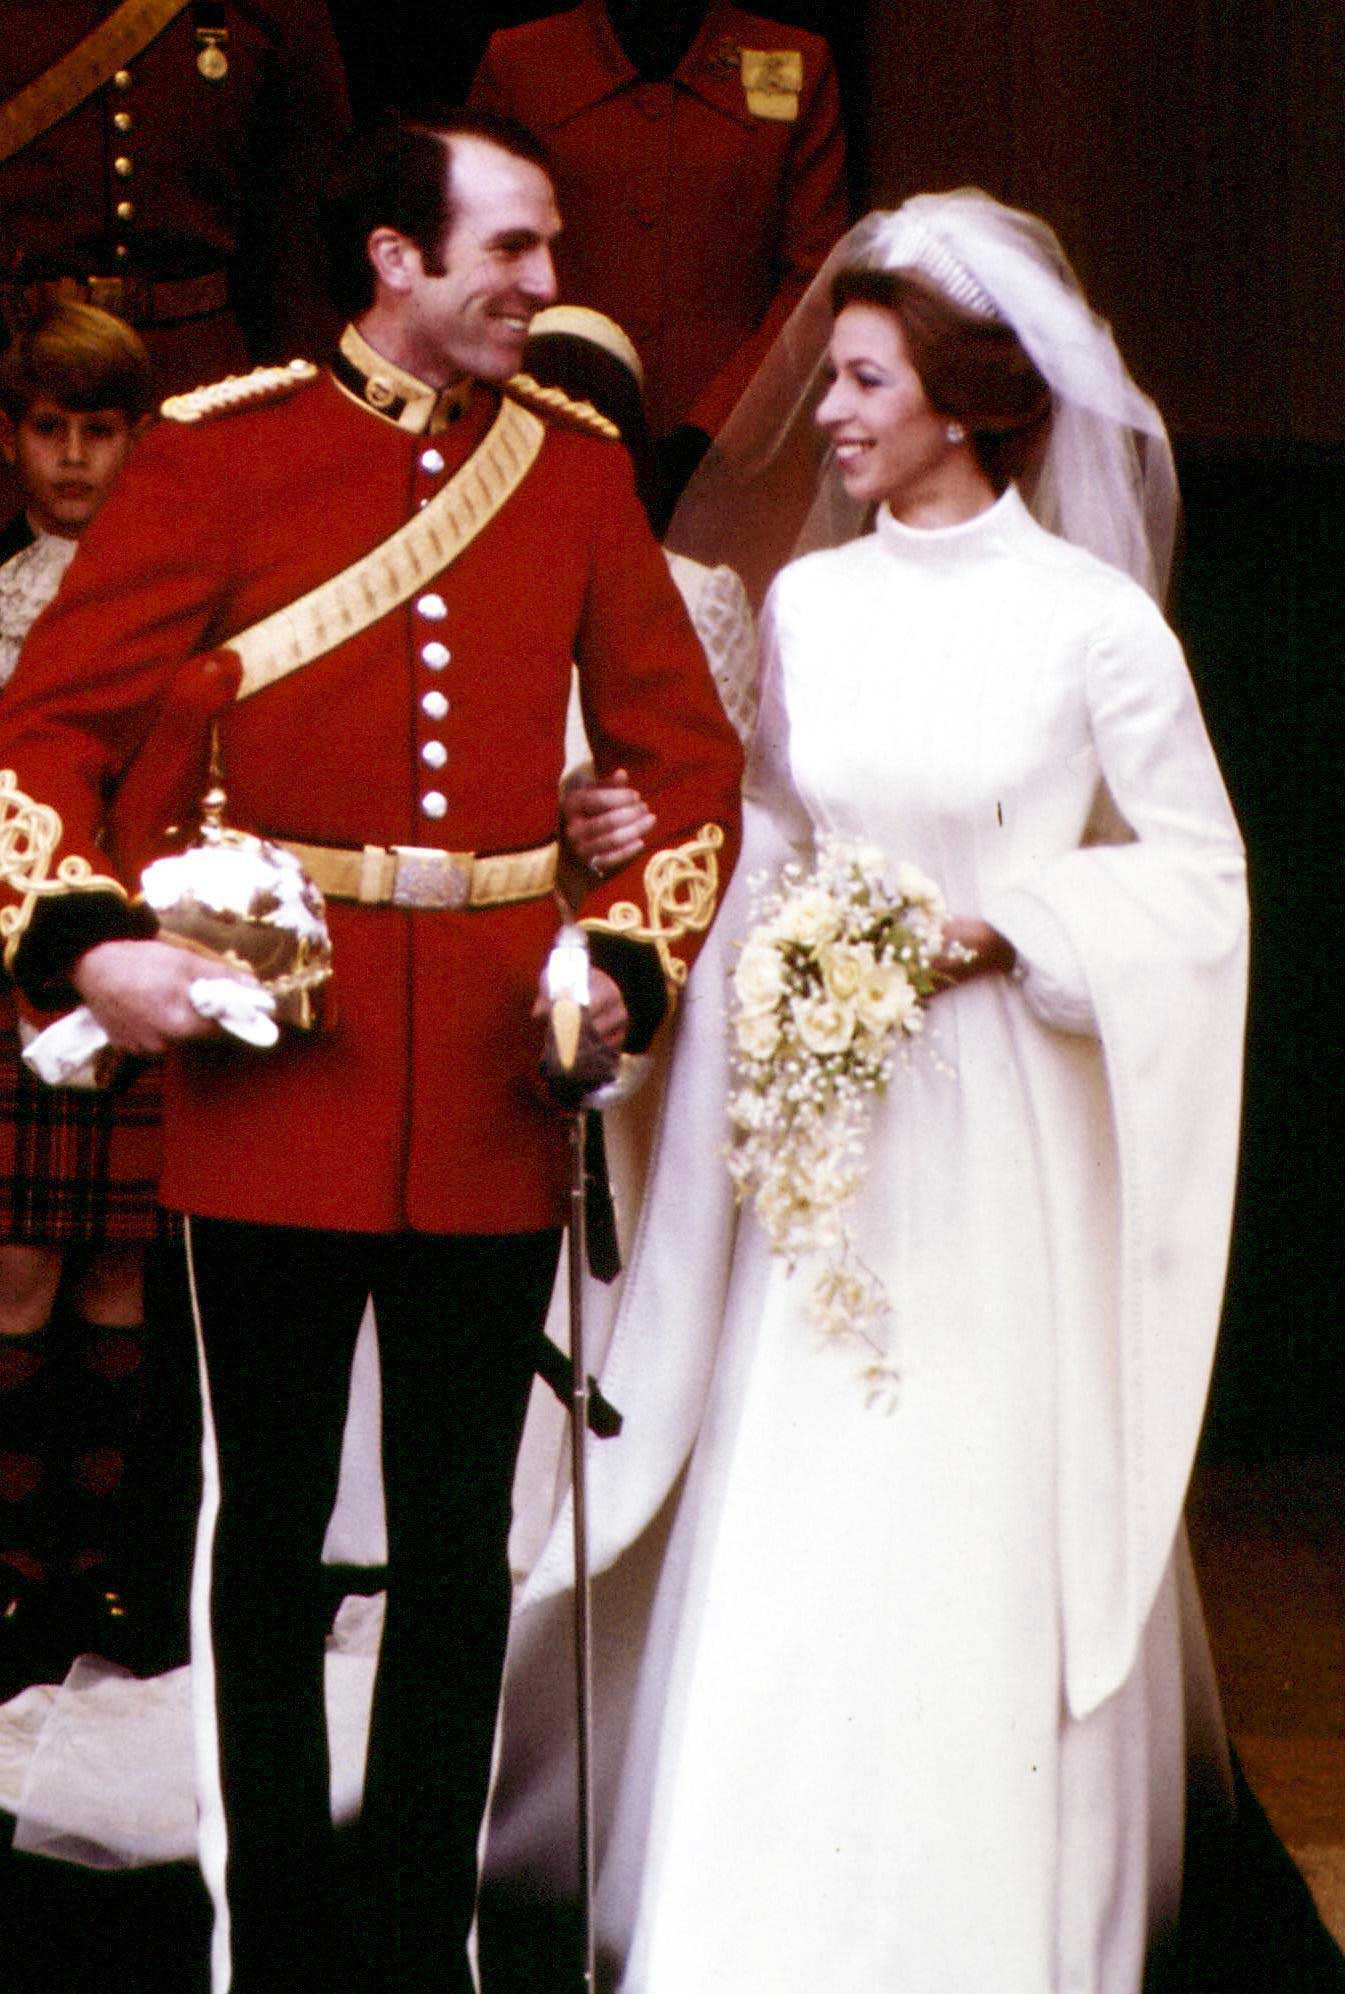 Princess Anne and Captain Mark Phillips leaving the west door of Westminster Abbey in London, after their wedding ceremony, Nov. 14, 1973.